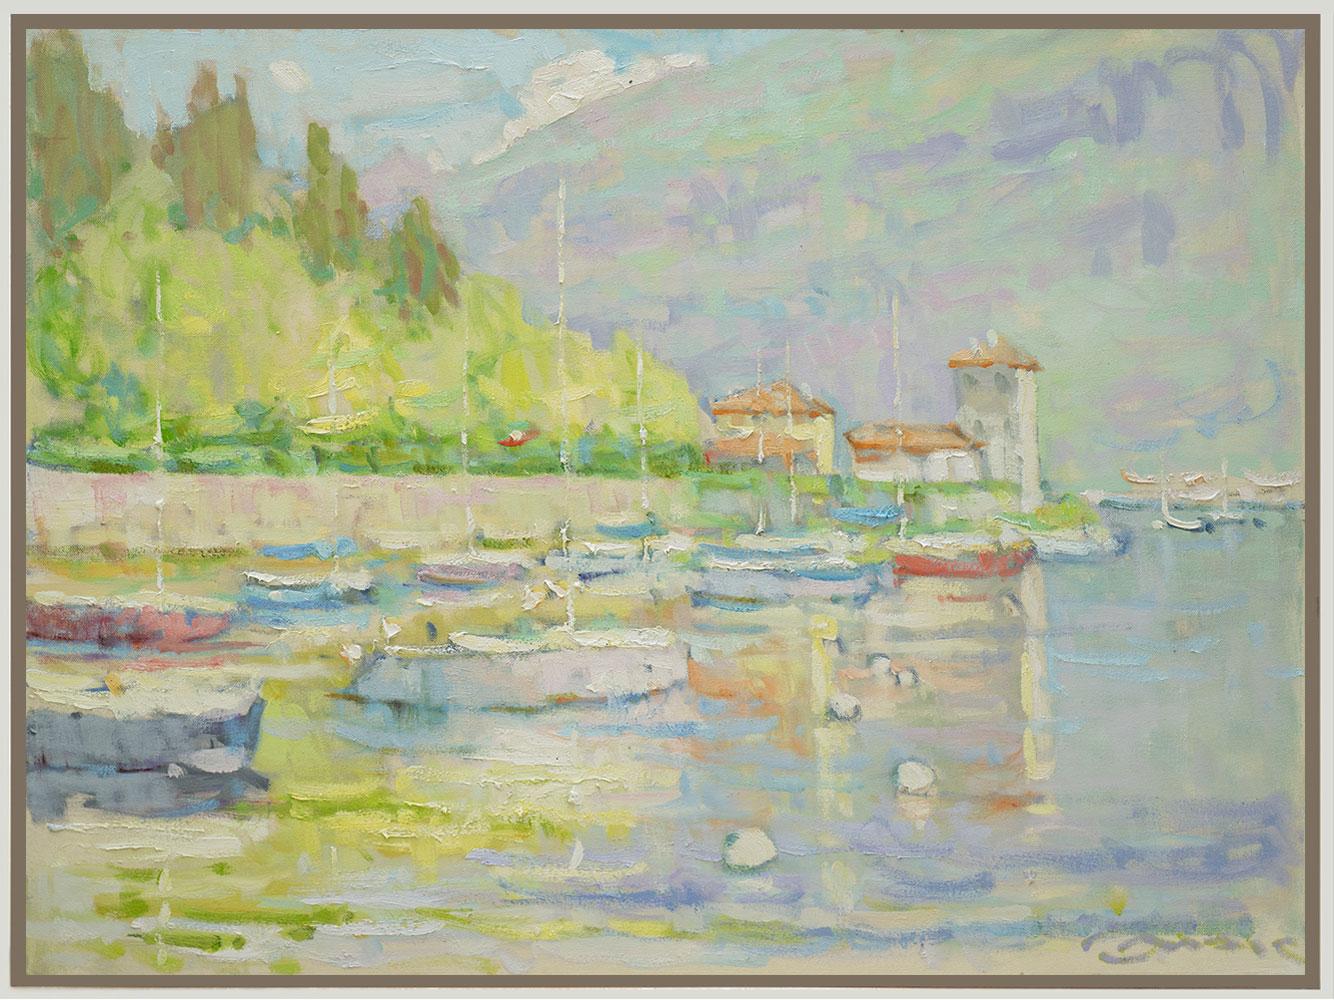 Jerry Fresia Landscape Painting - "The Other Side" – Impressionist landscape painting, oil on canvas, plein air